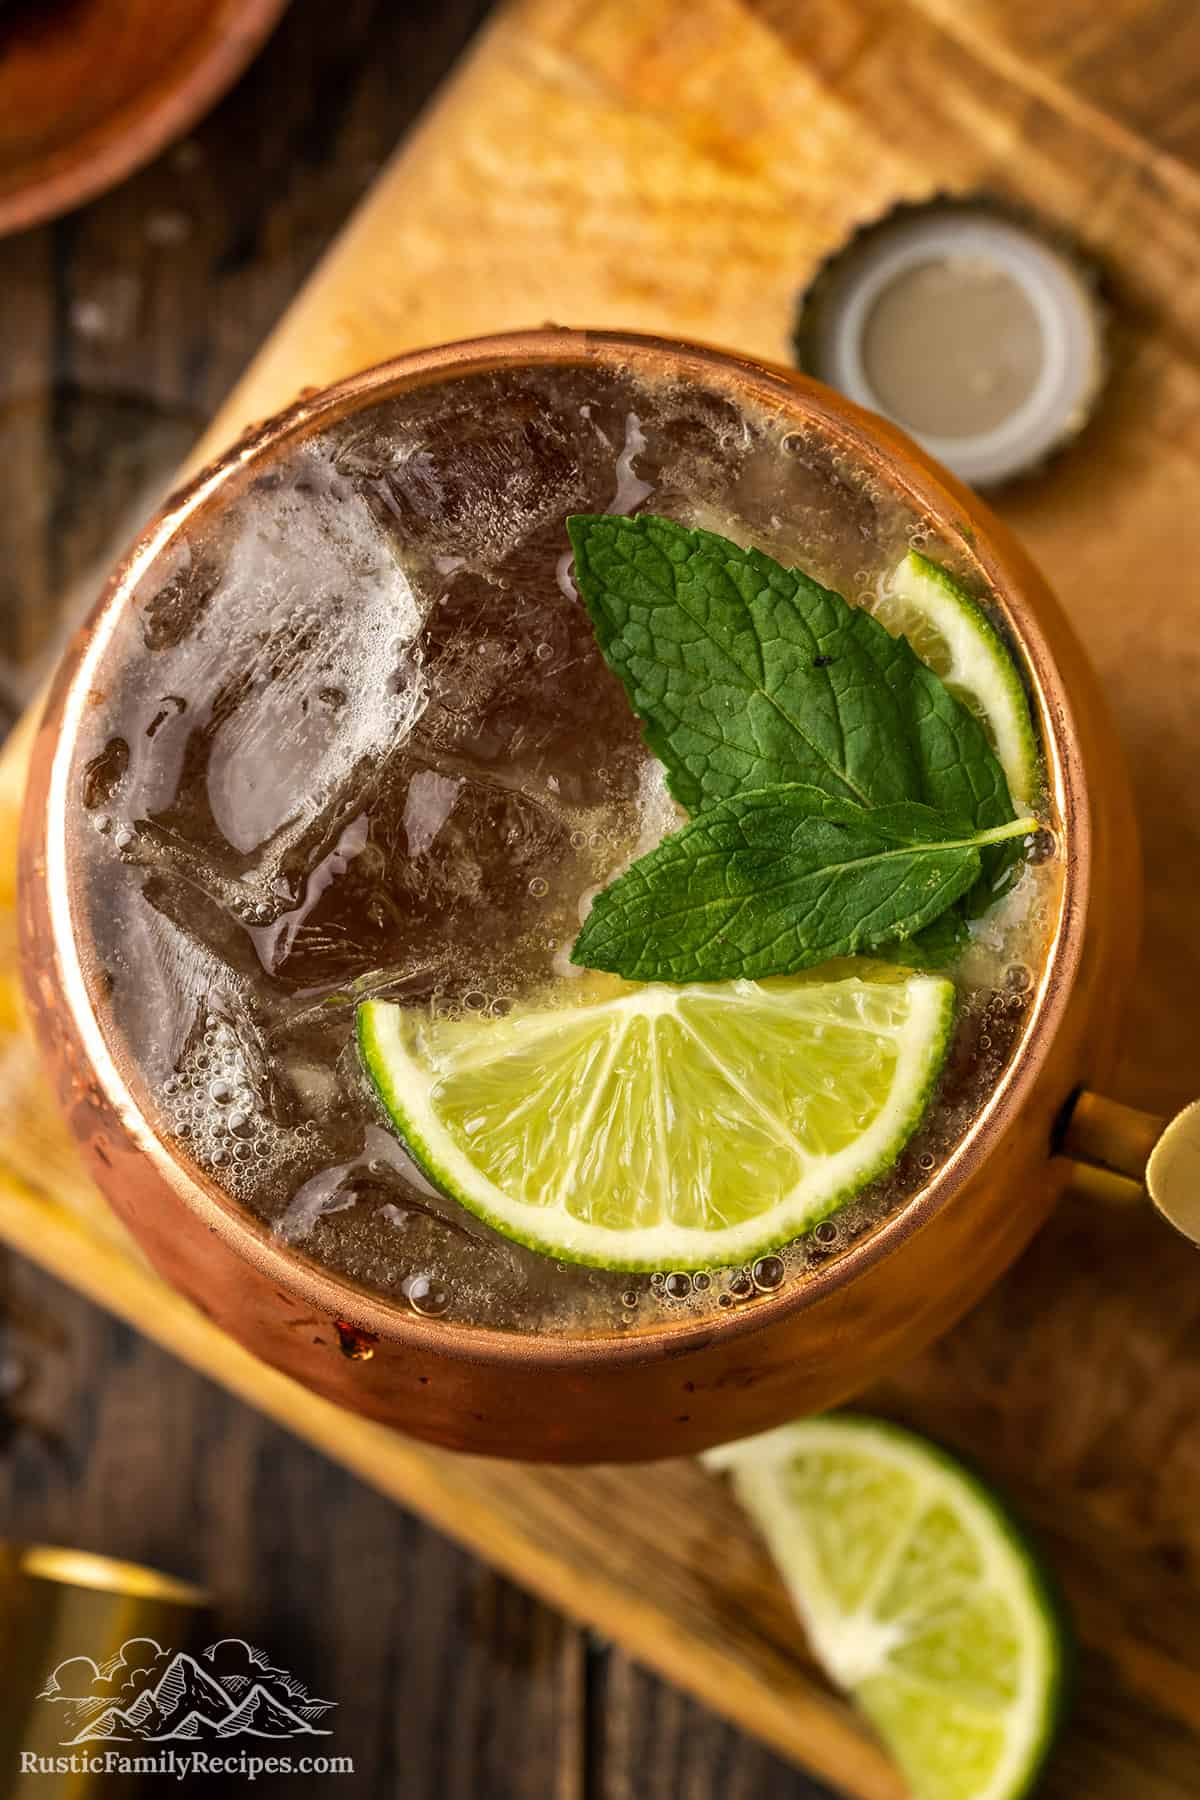 Top view of a Kentucky Mule drink in a copper